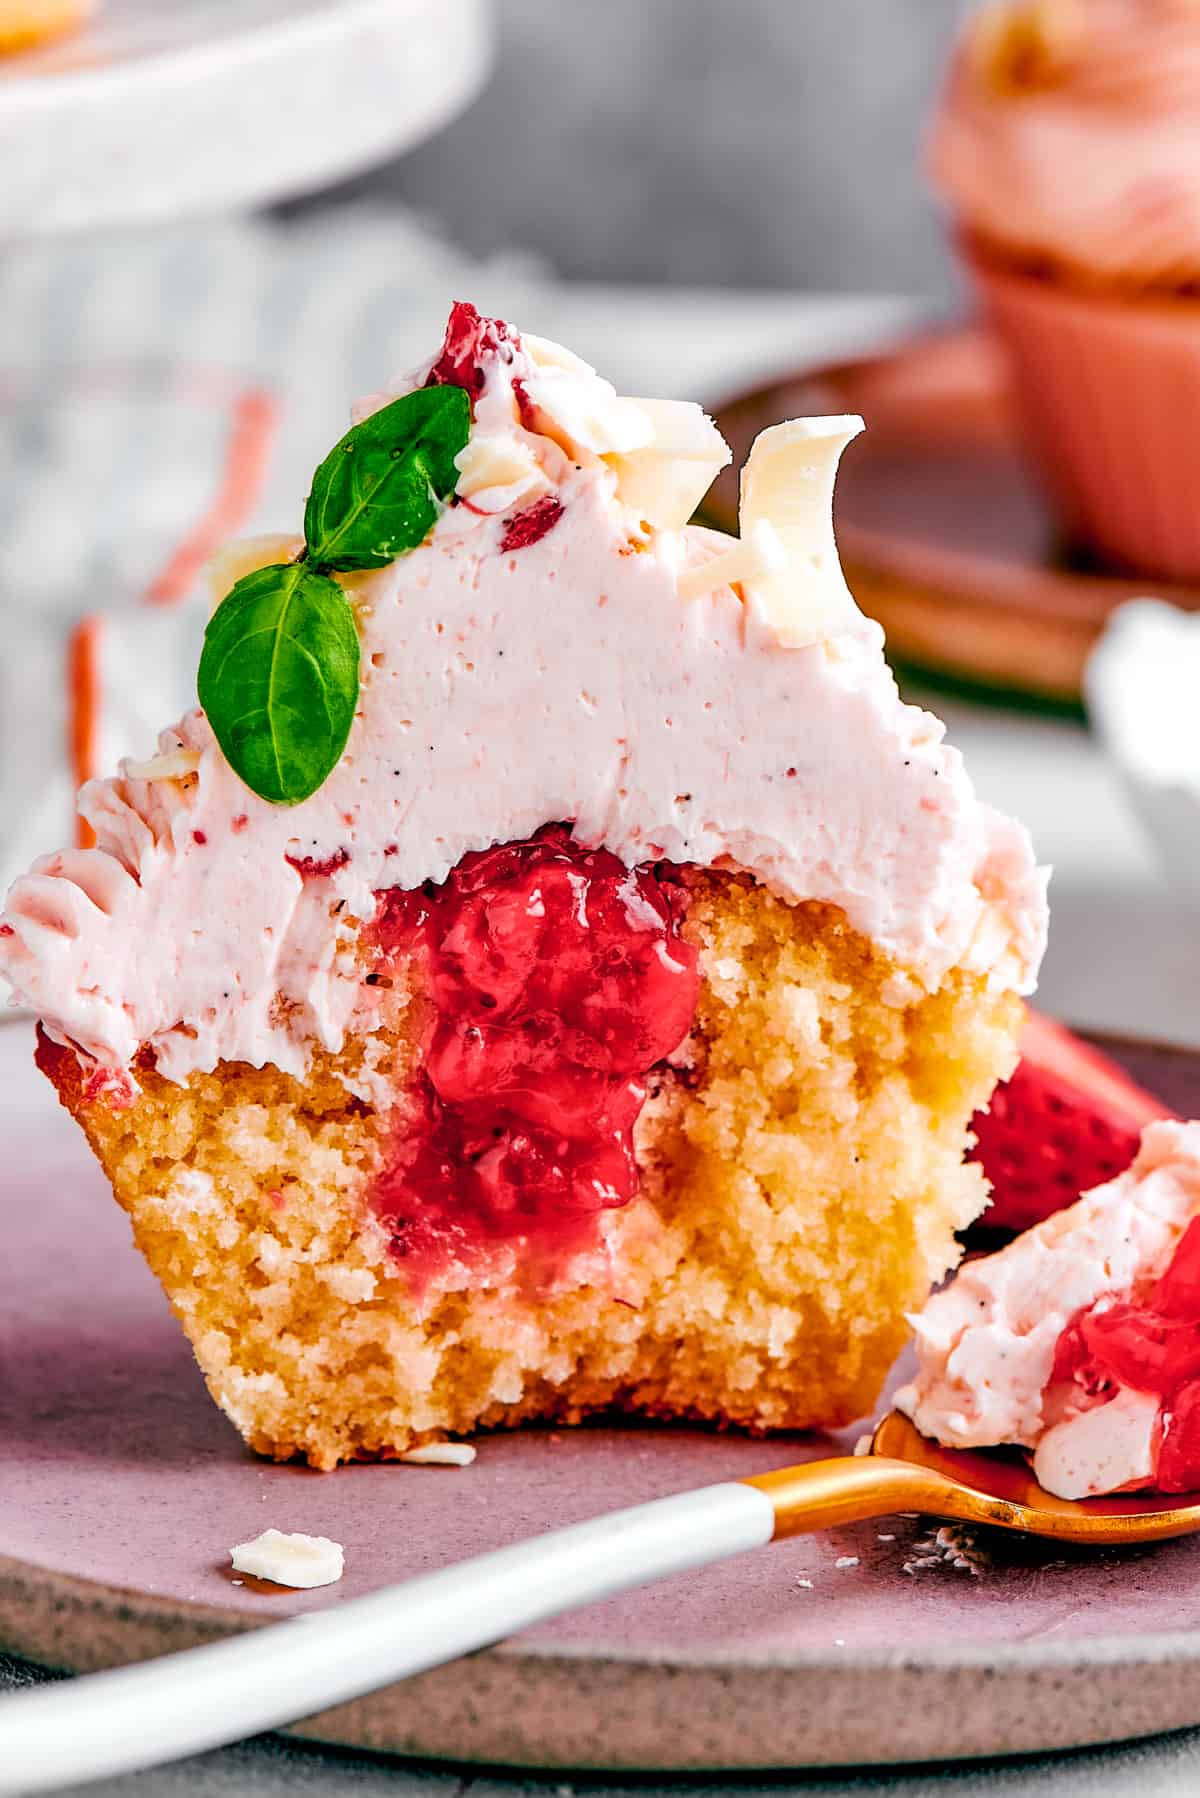 A strawberry cupcake, cut in half to show the filling.